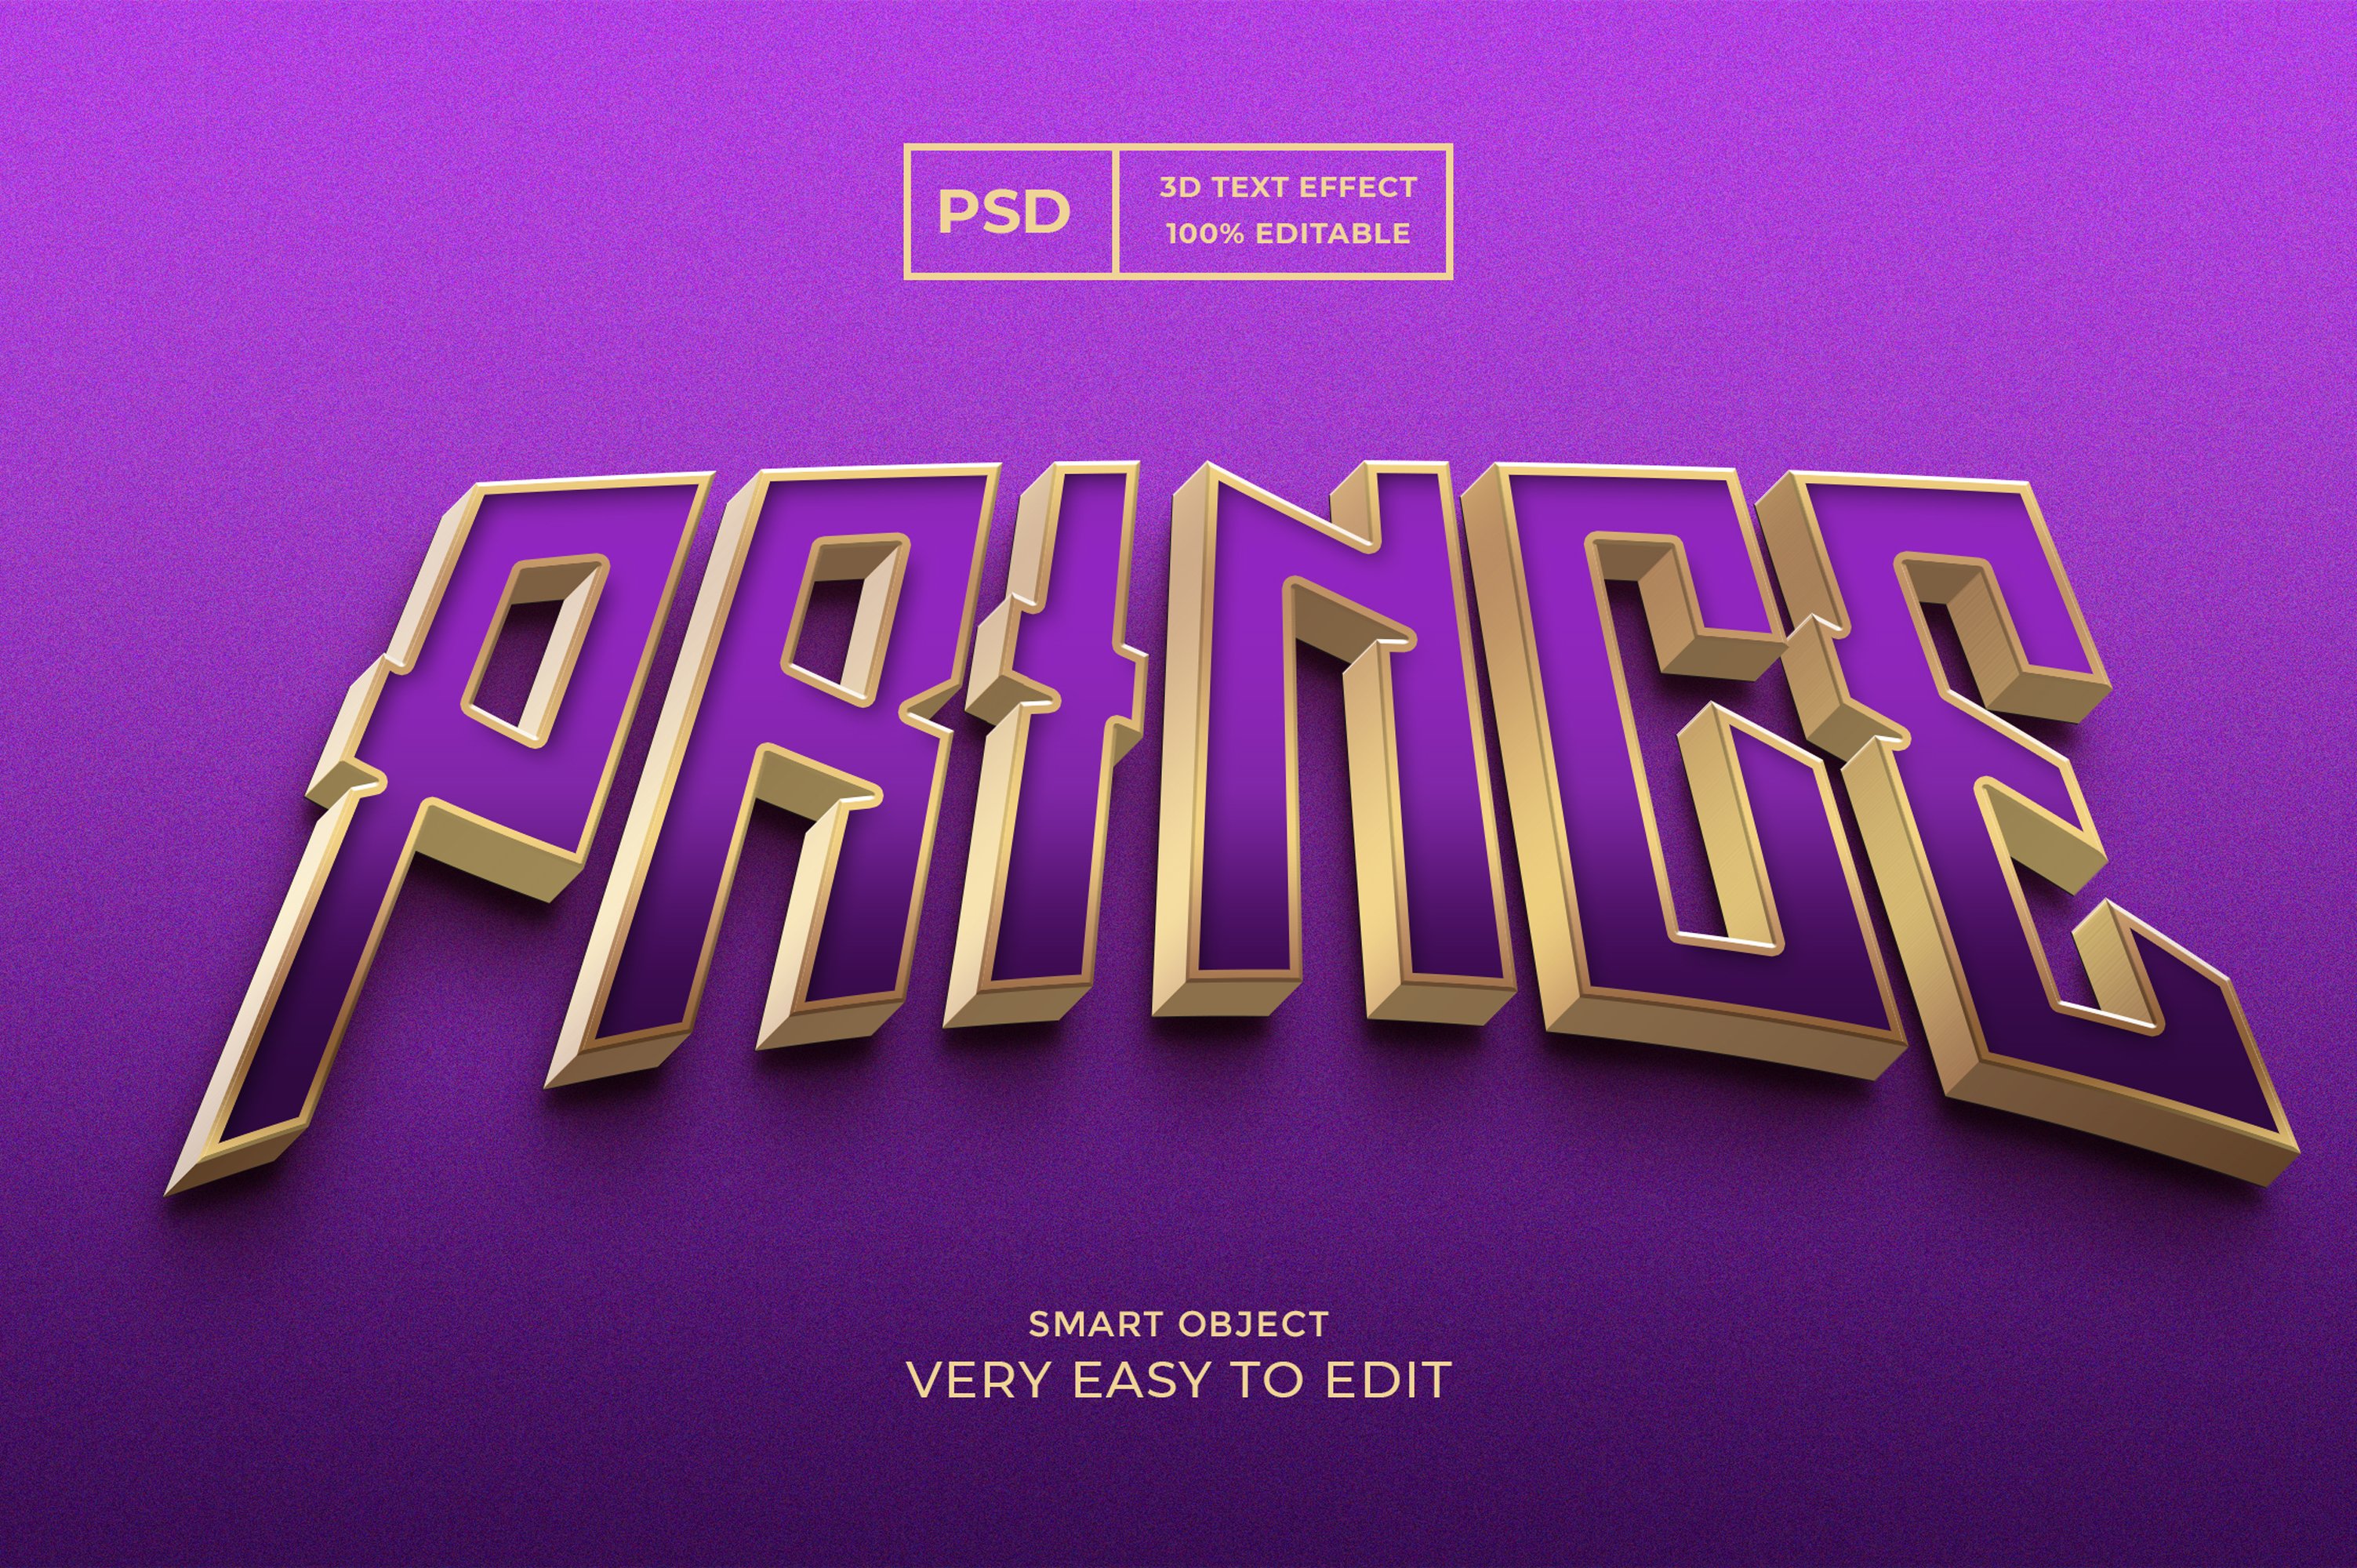 Prince 3d text style effect psdcover image.